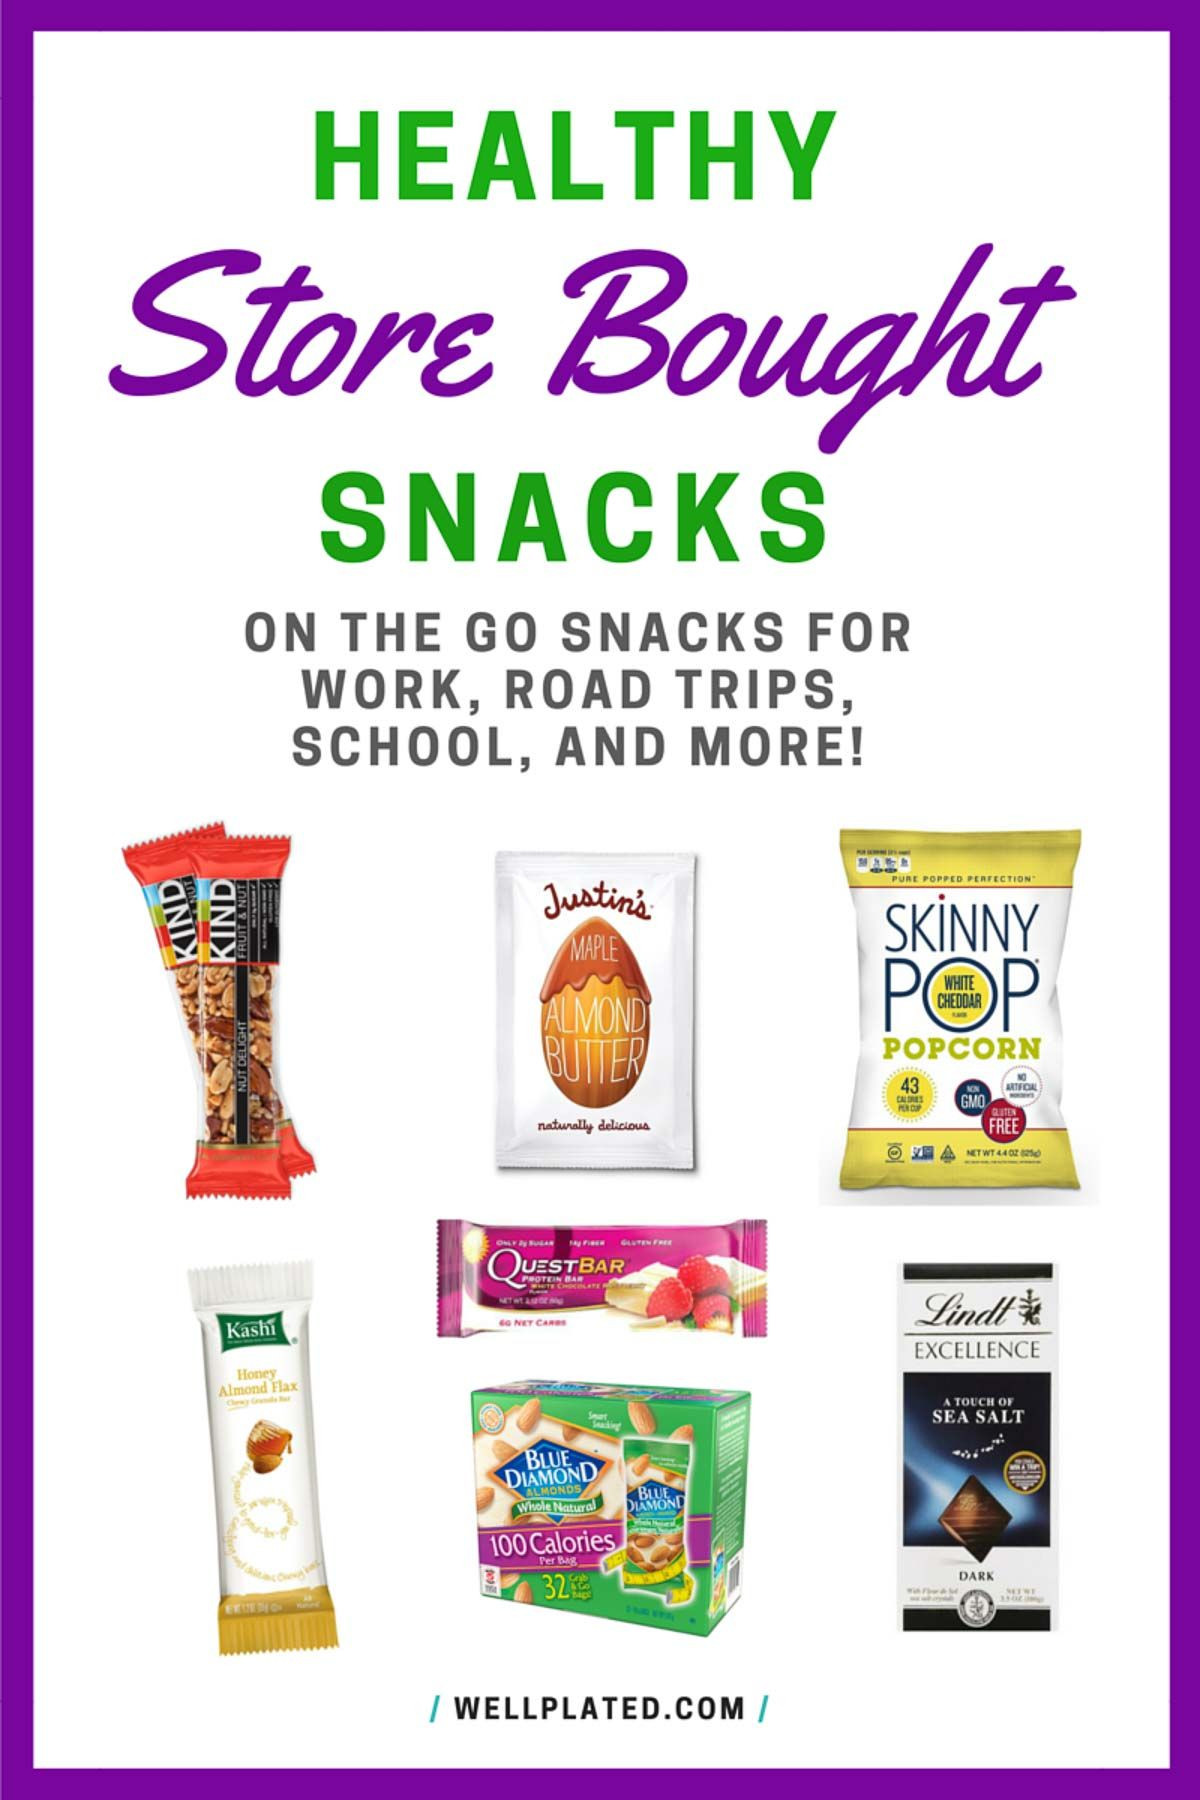 Healthy Store Bought Snacks
 Healthy store bought snacks for when you are on the go